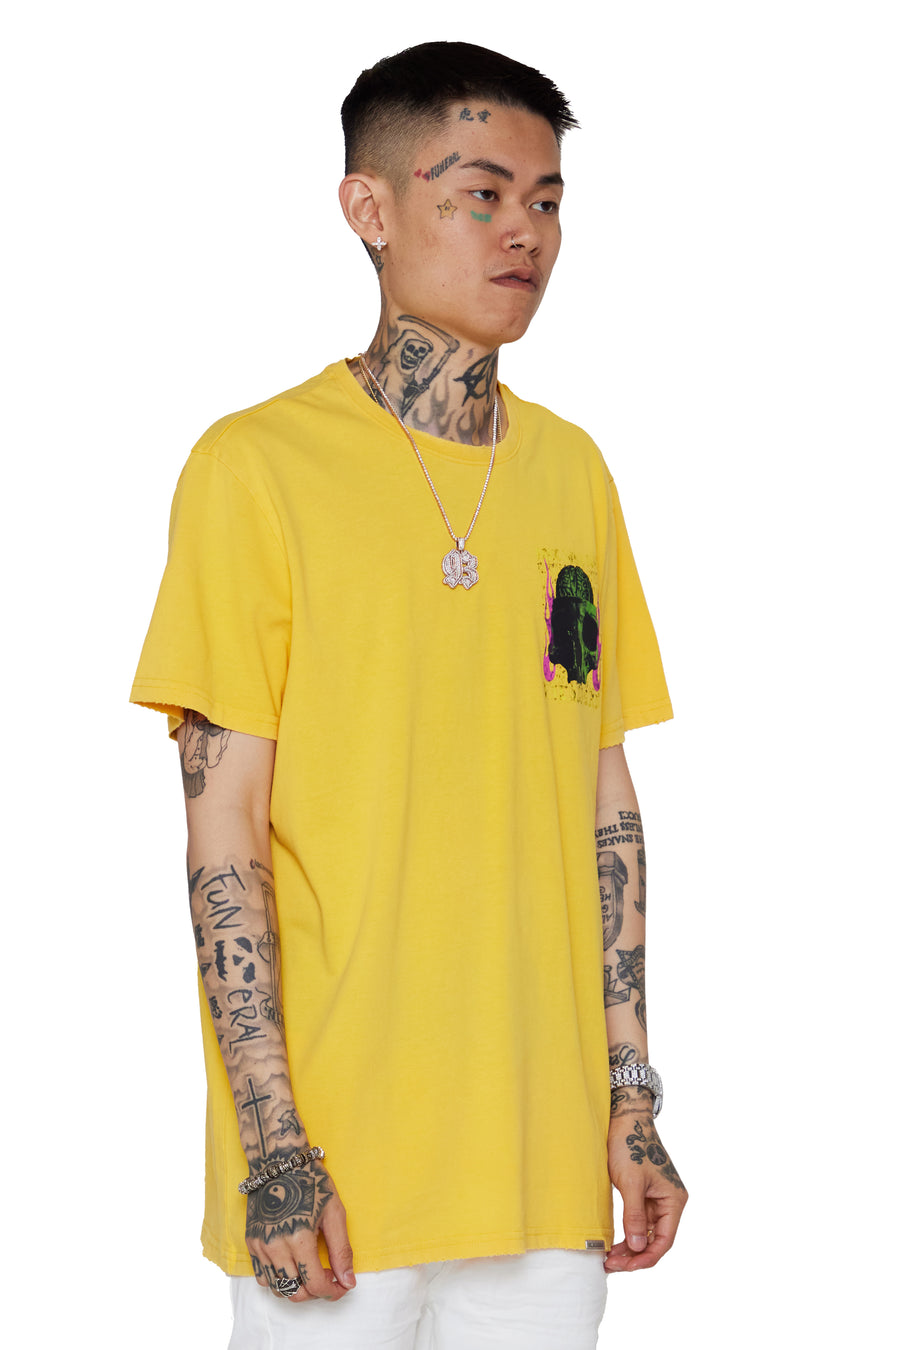 "FREE MINDS 5" VINTAGE GOLDEN YELLOW TEE